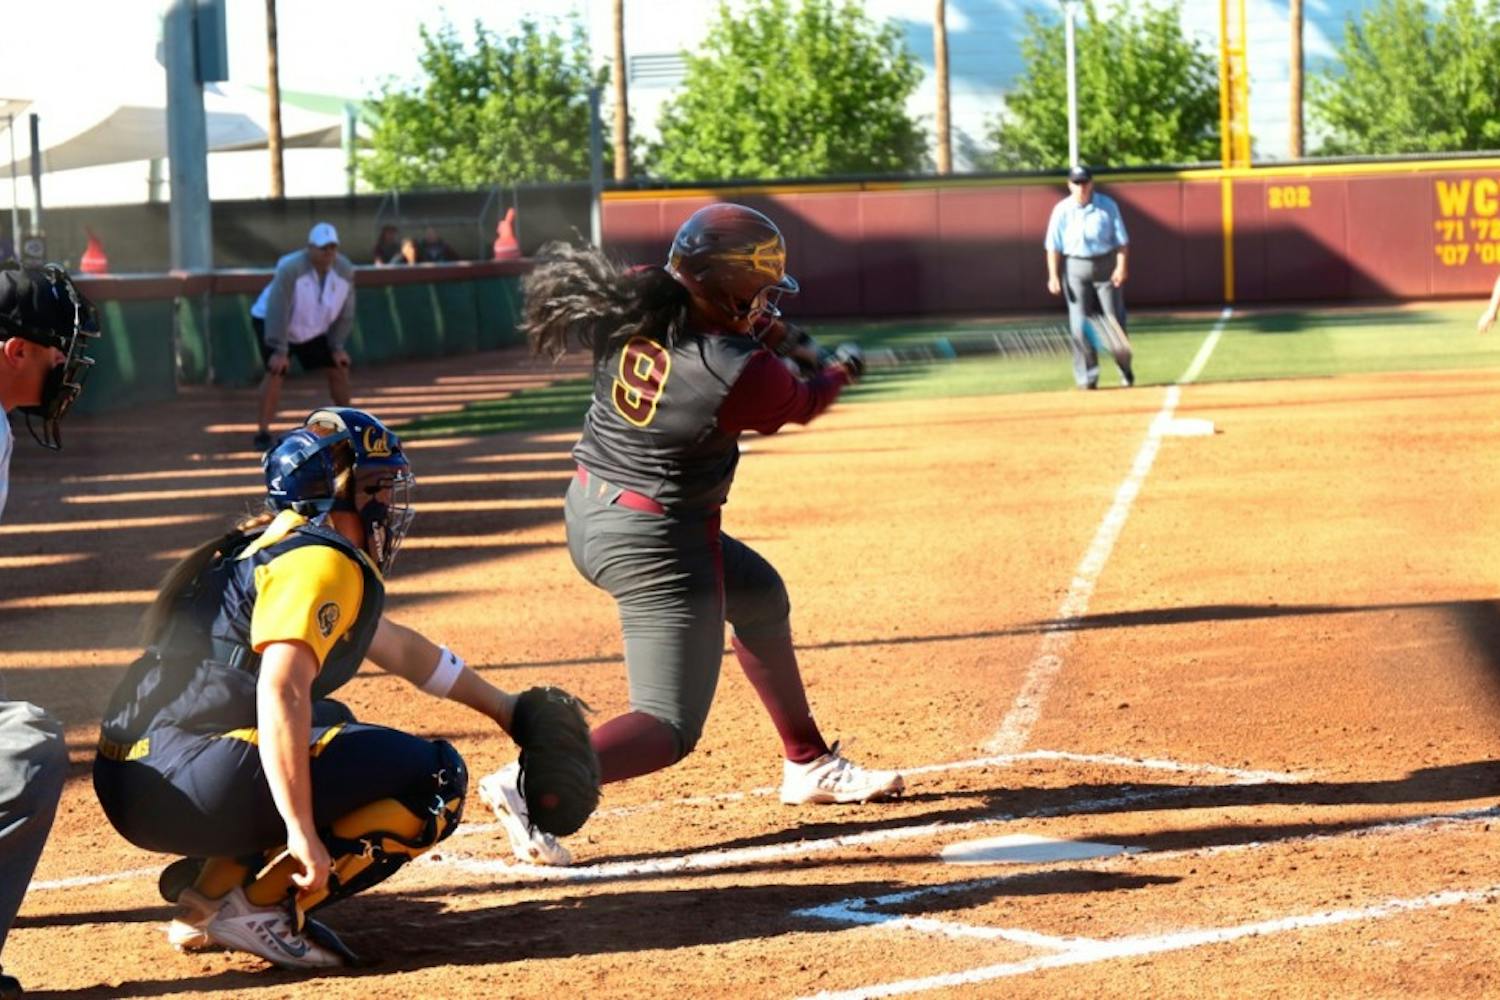 Senior designated player Amber Freeman hits a double in a game against Cal on Saturday, March 21, 2015 at Farrington Softball Stadium in Tempe. The Sun Devils defeated the Golden Bears 6-5. (Kat Simonovic/The State Press)